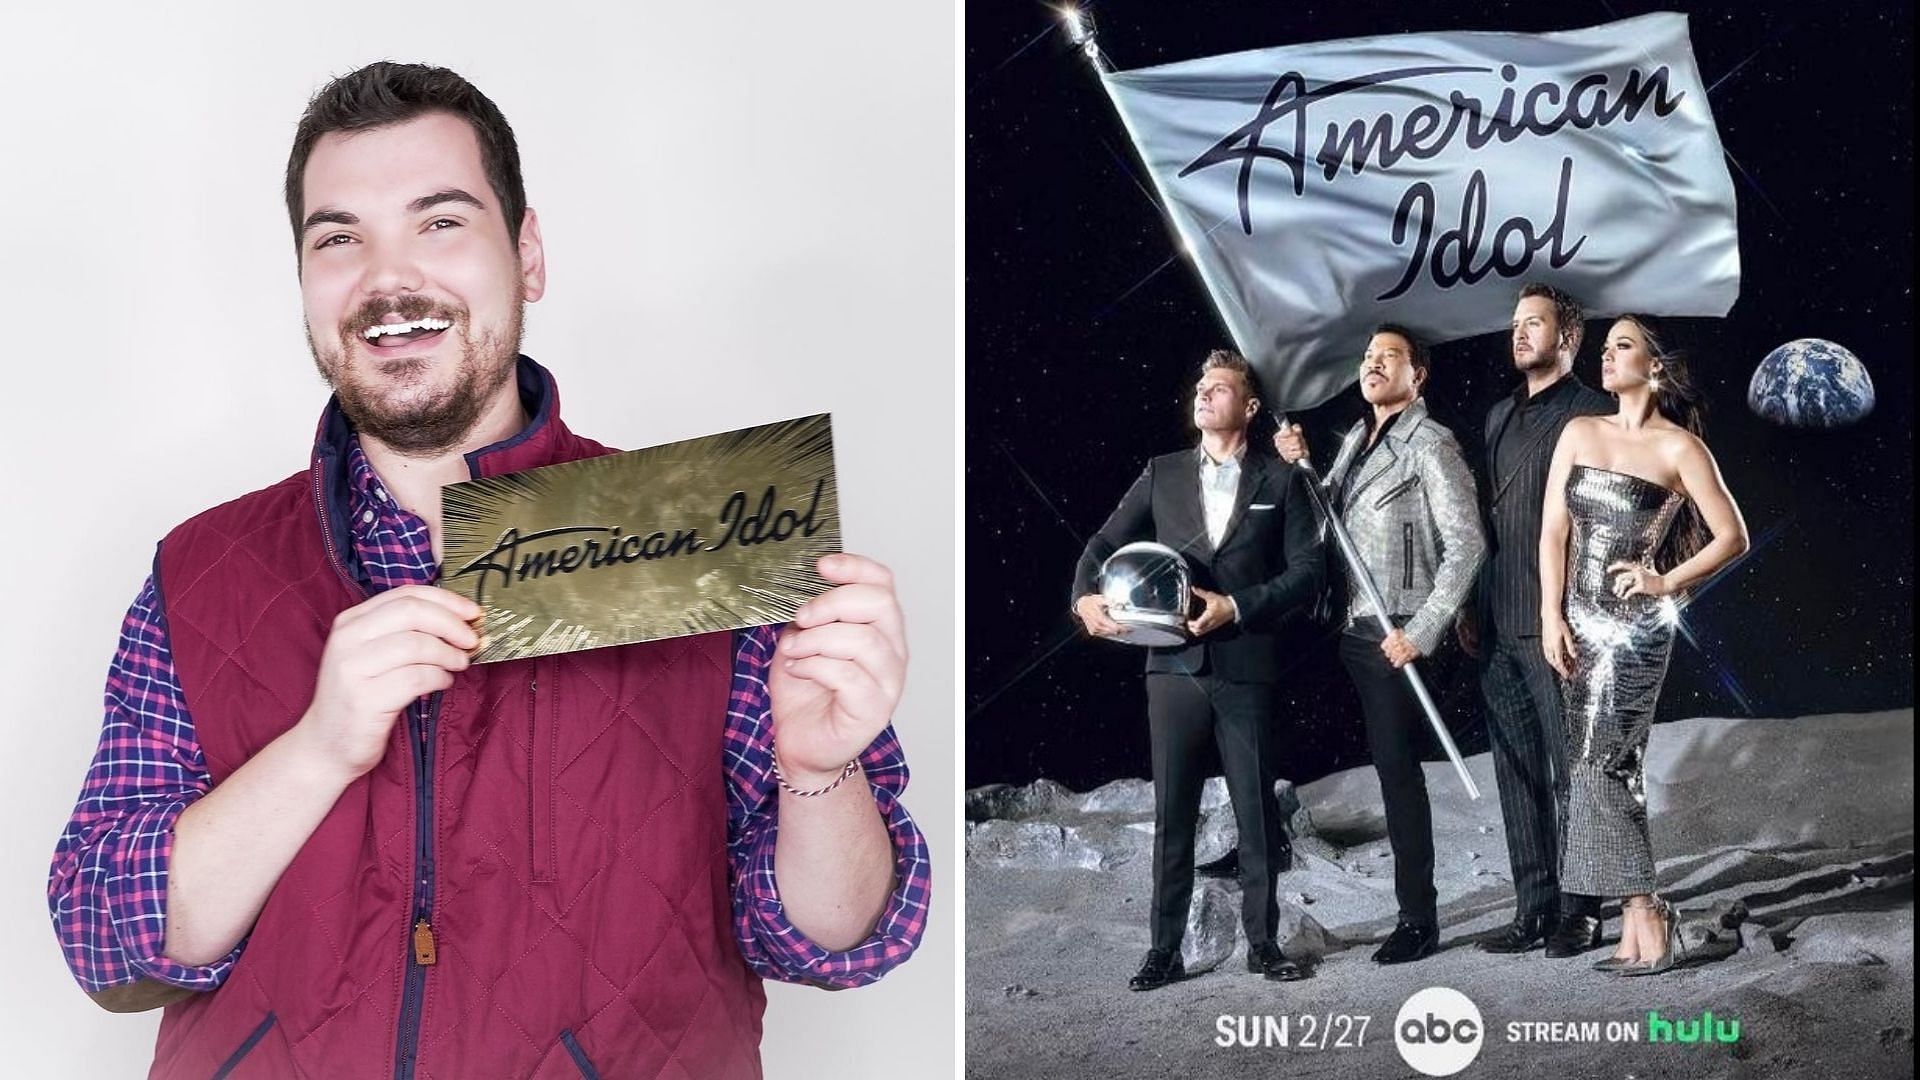 American Idol contestant Sam Finelli impressed  judges with his journey and music (Image via Instagram/samfinellimusic13 and americanidol)